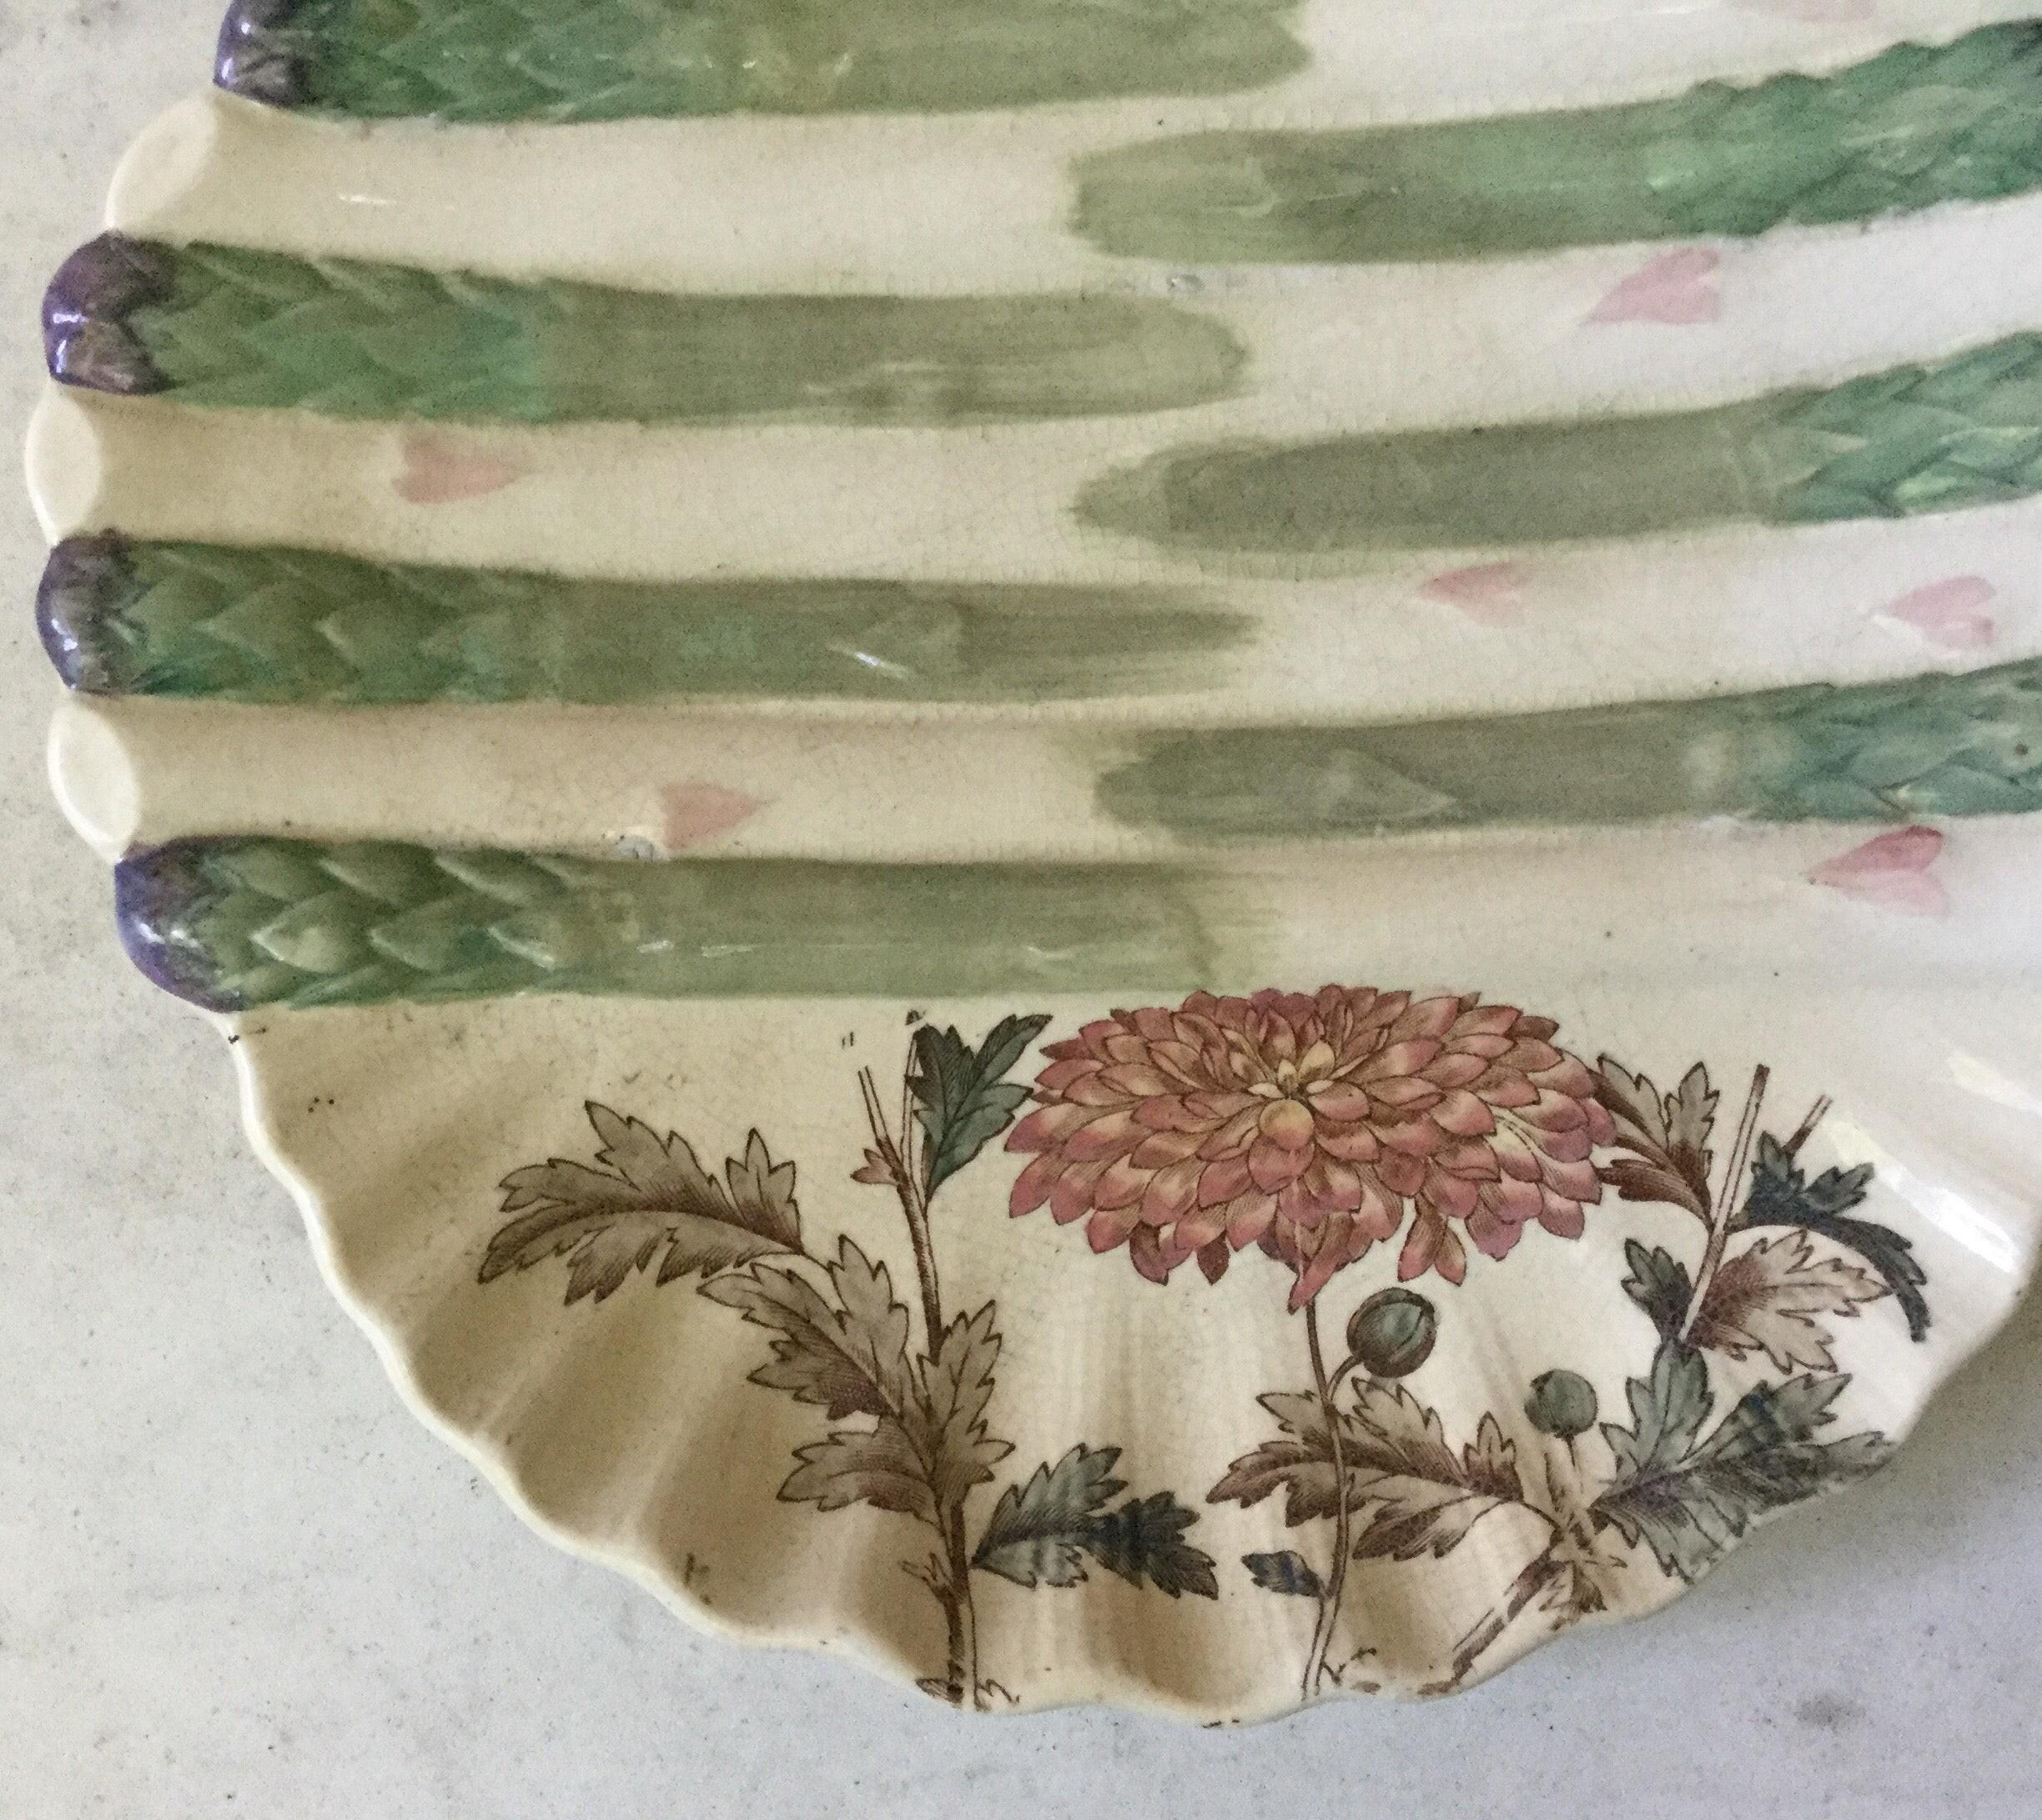 19th century English Majolica shell-shaped asparagus plate decorated with mums flowers 